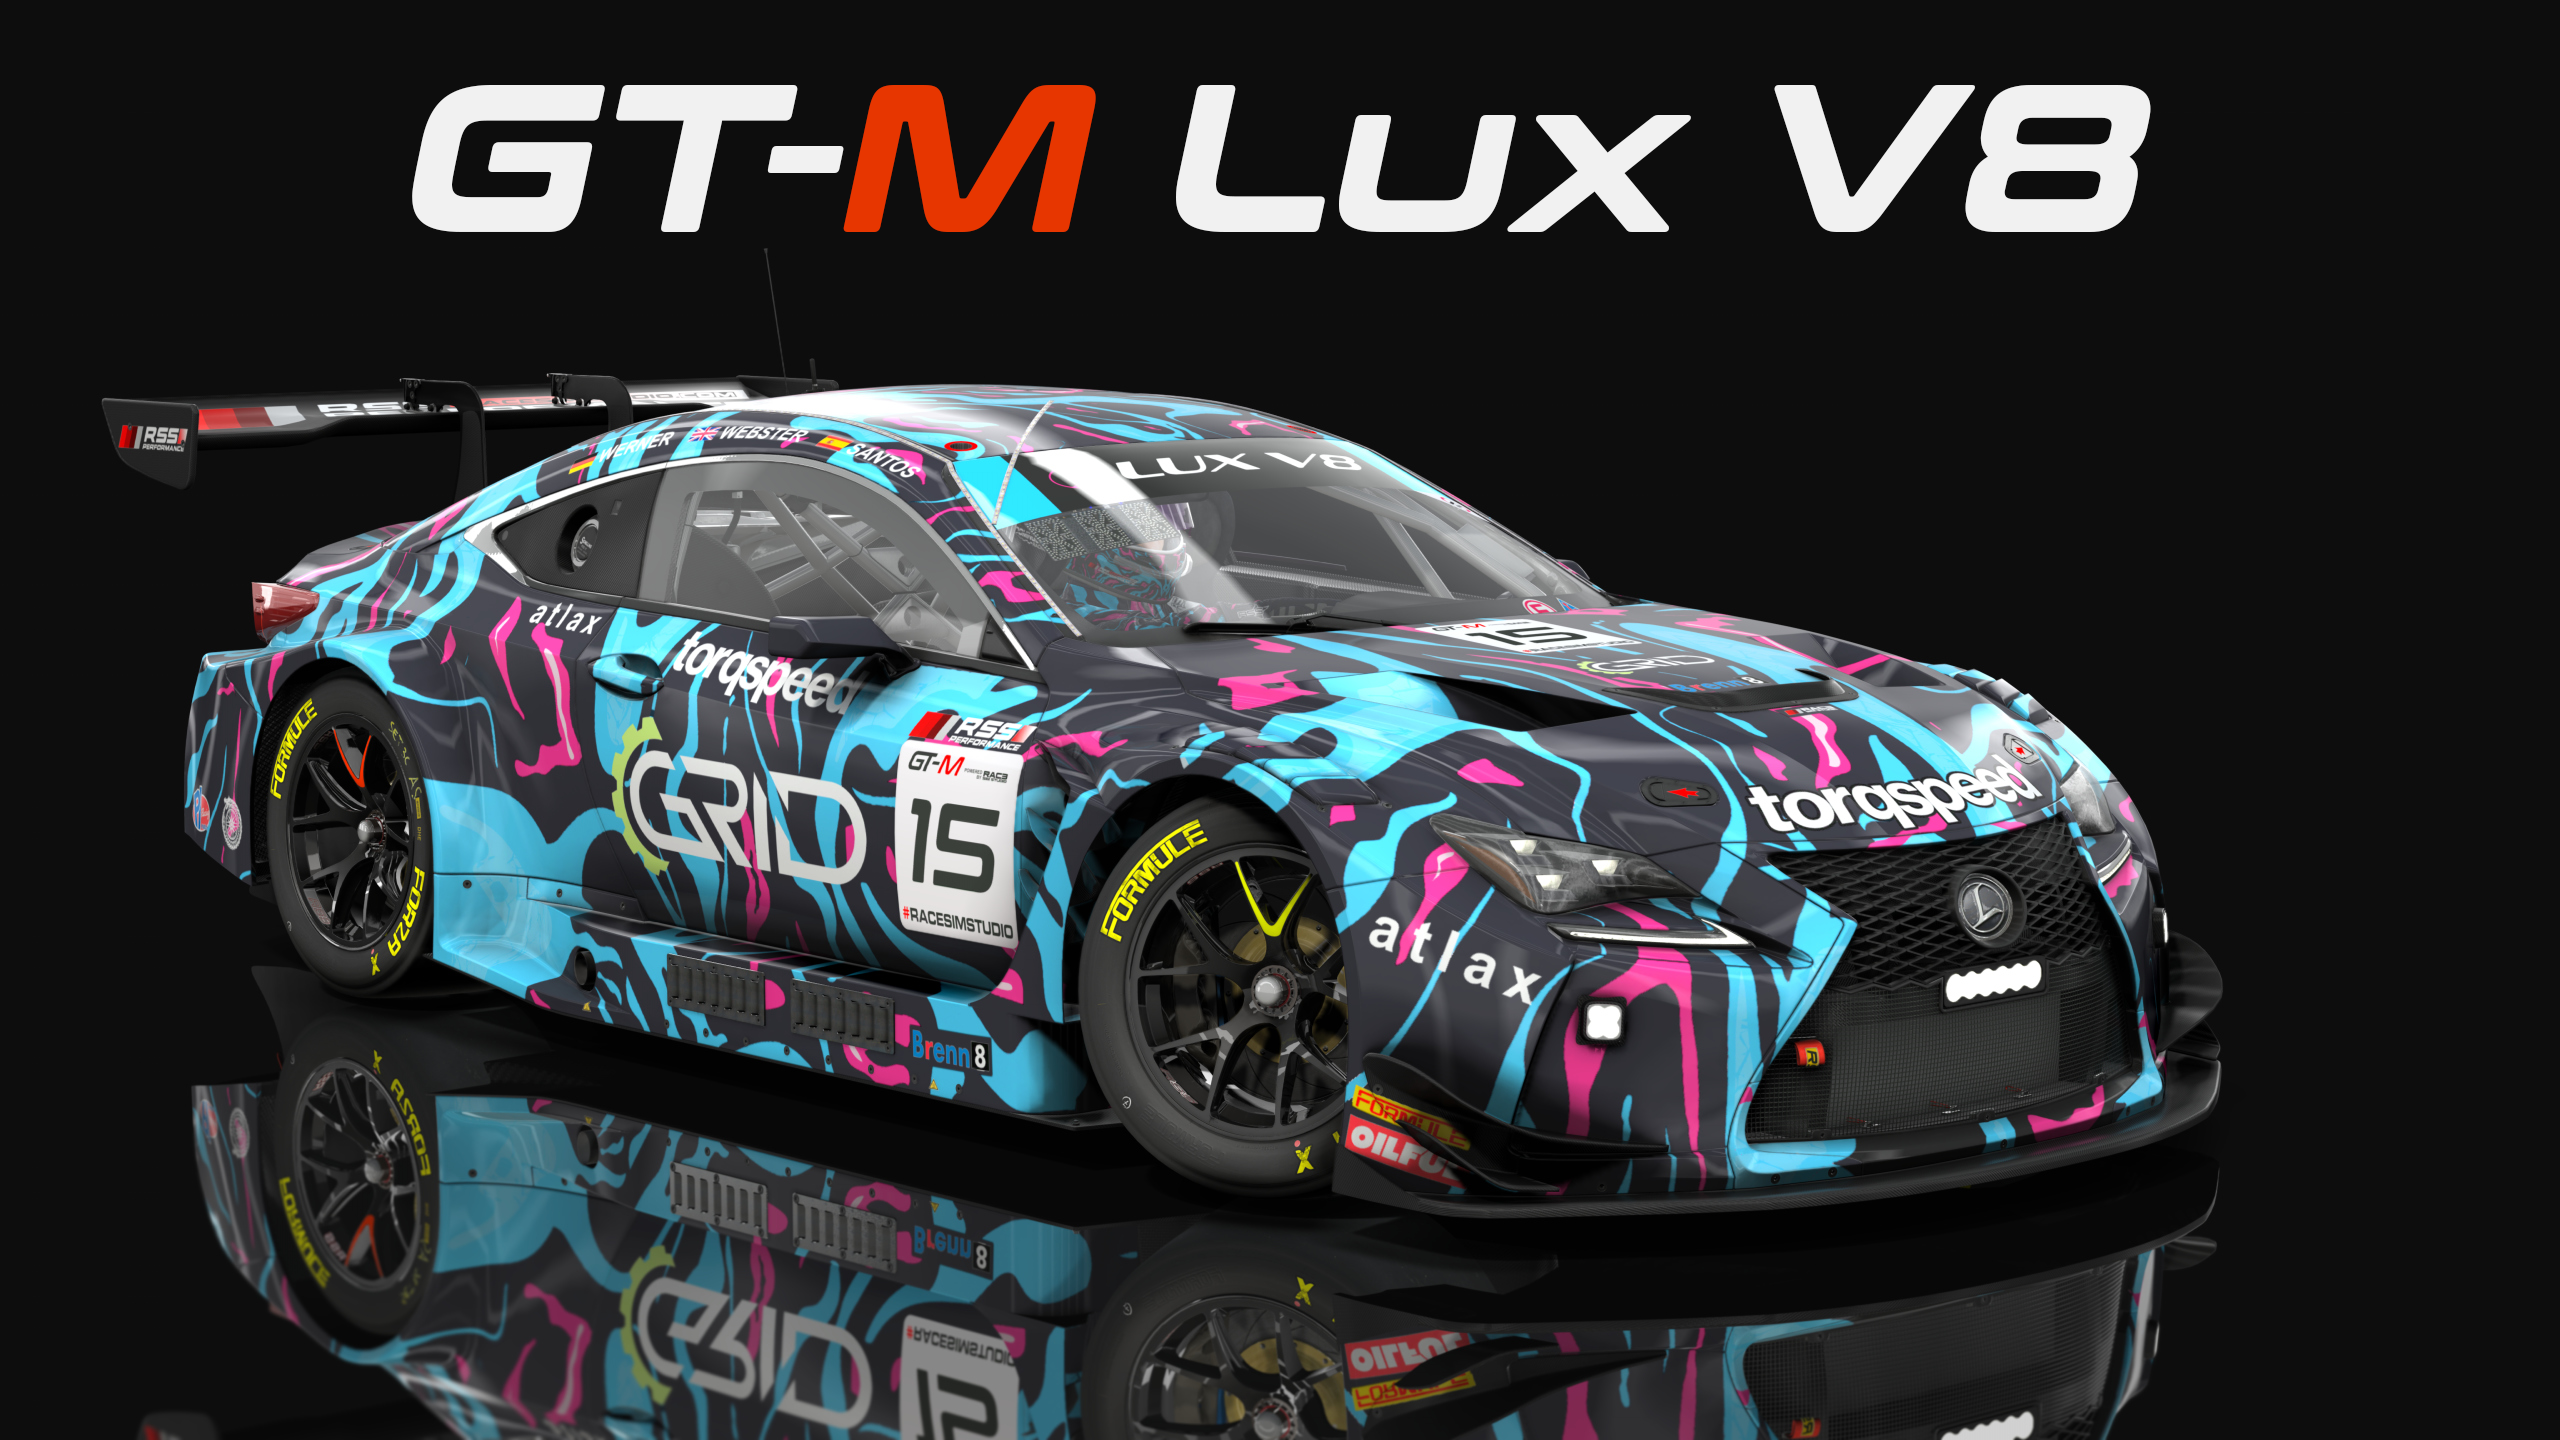 More information about "Assetto Corsa: GT-M Lux V8 by Race Sim Studio disponibile"